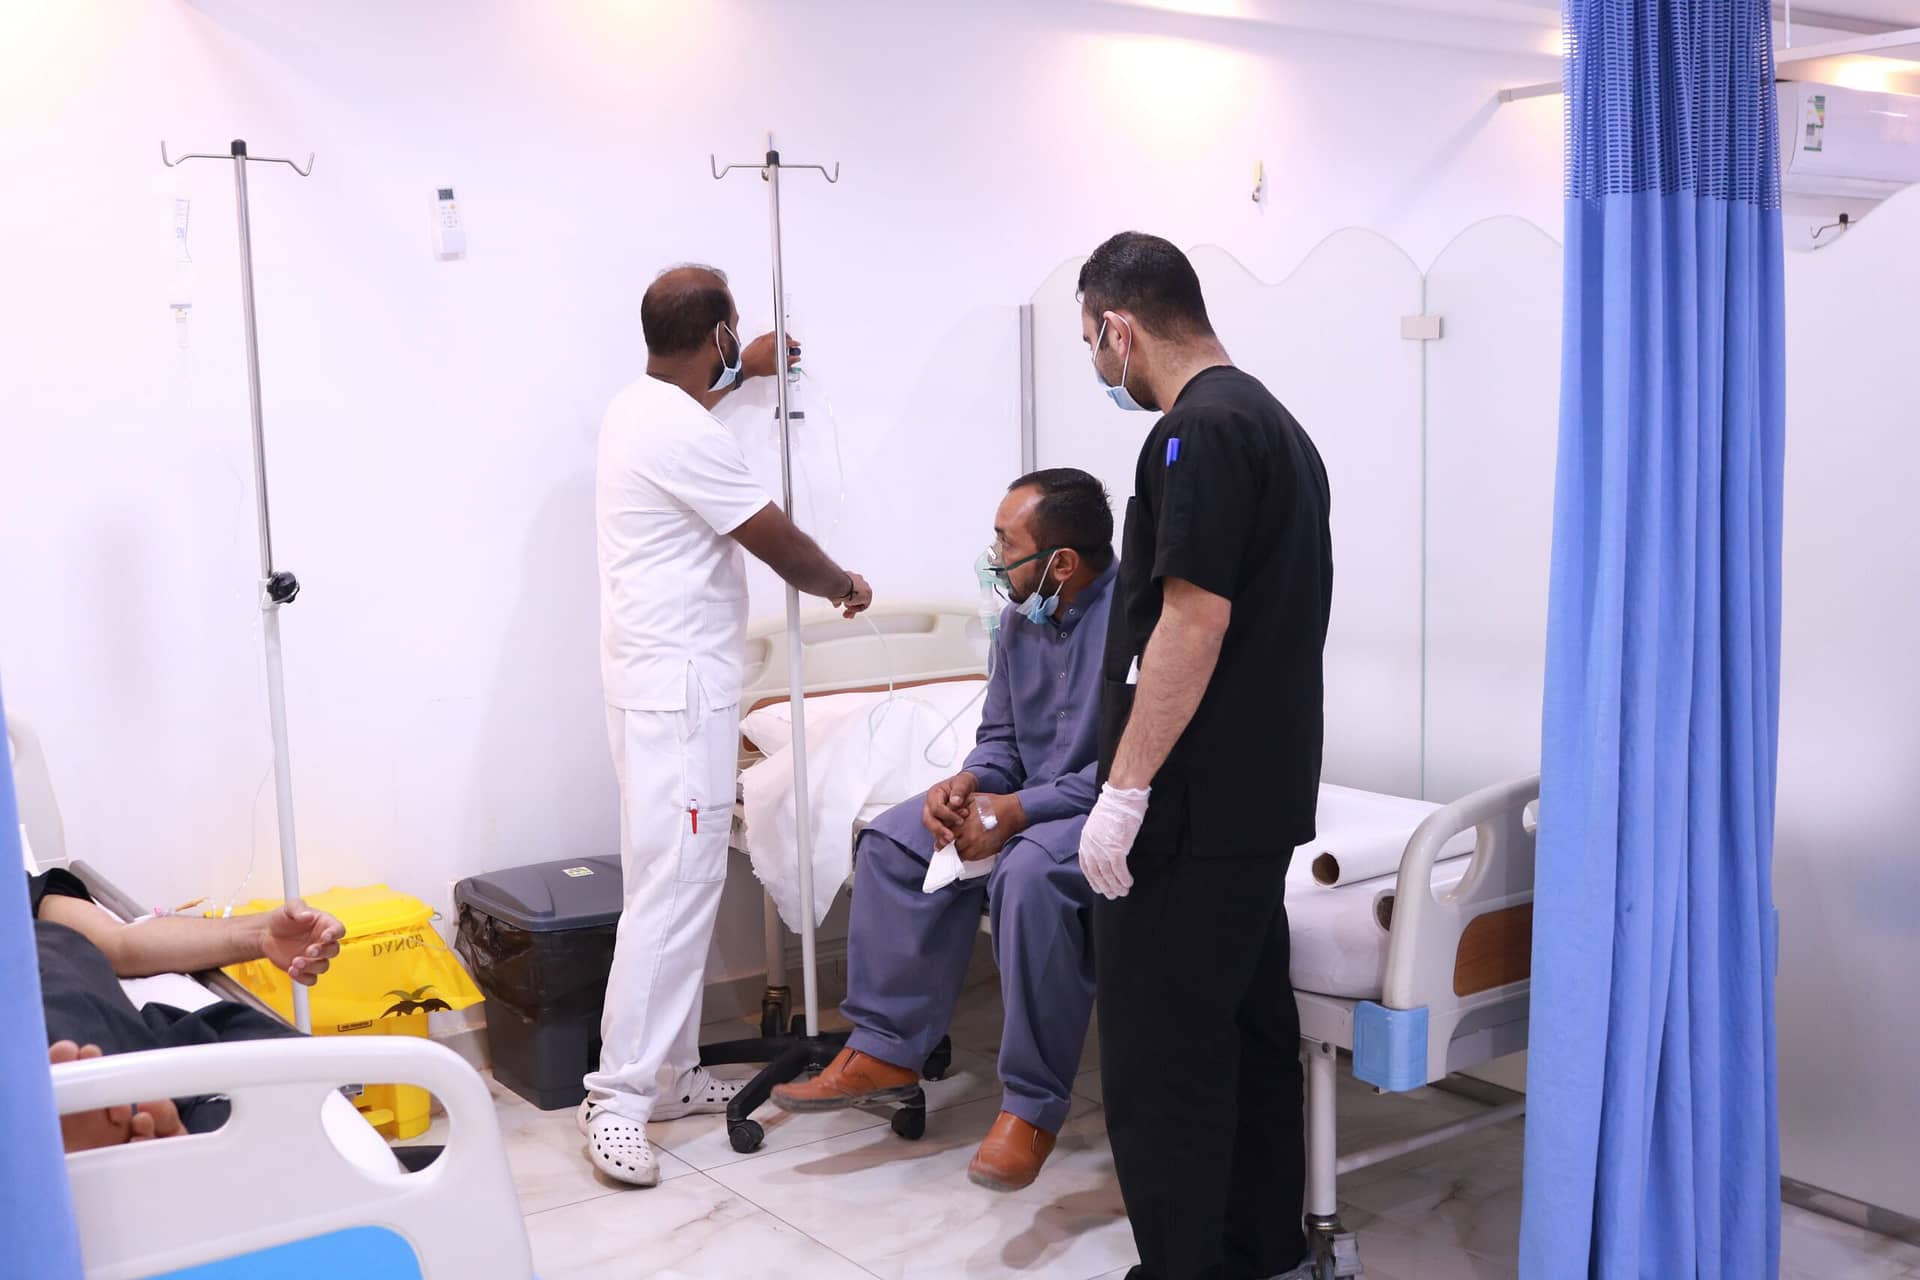 during treatments, doctors, equipment's and ambiance Inside the Healthcare Polyclinic